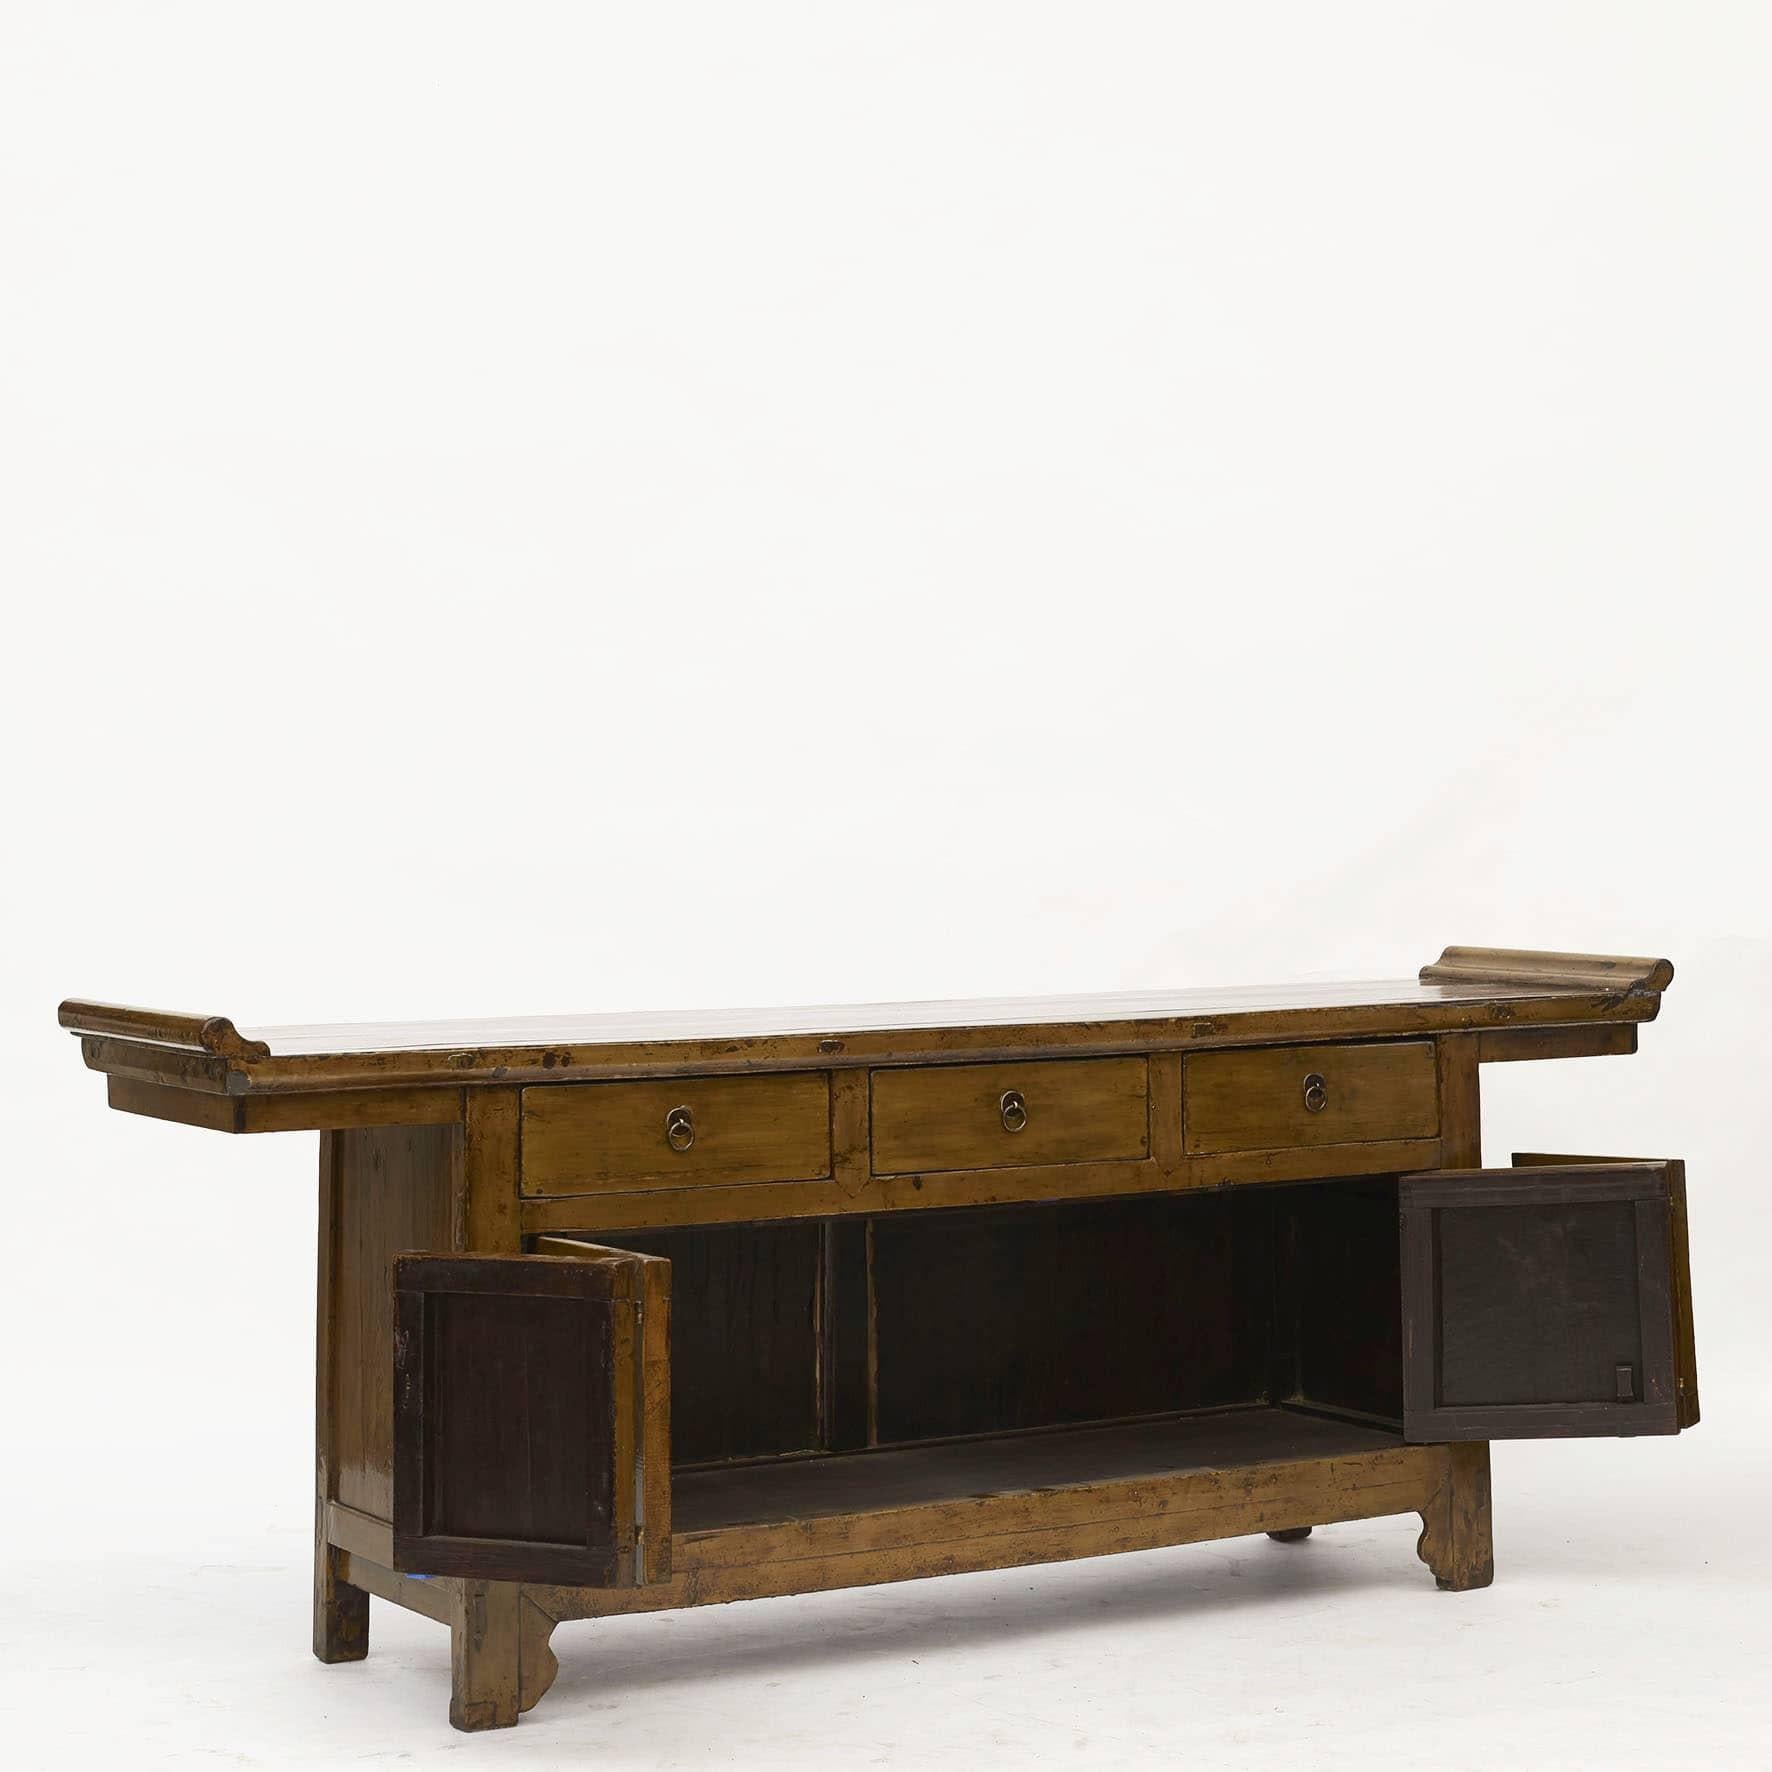 Chinese Antique Alter Sideboard, Beijing, c 1840-1860